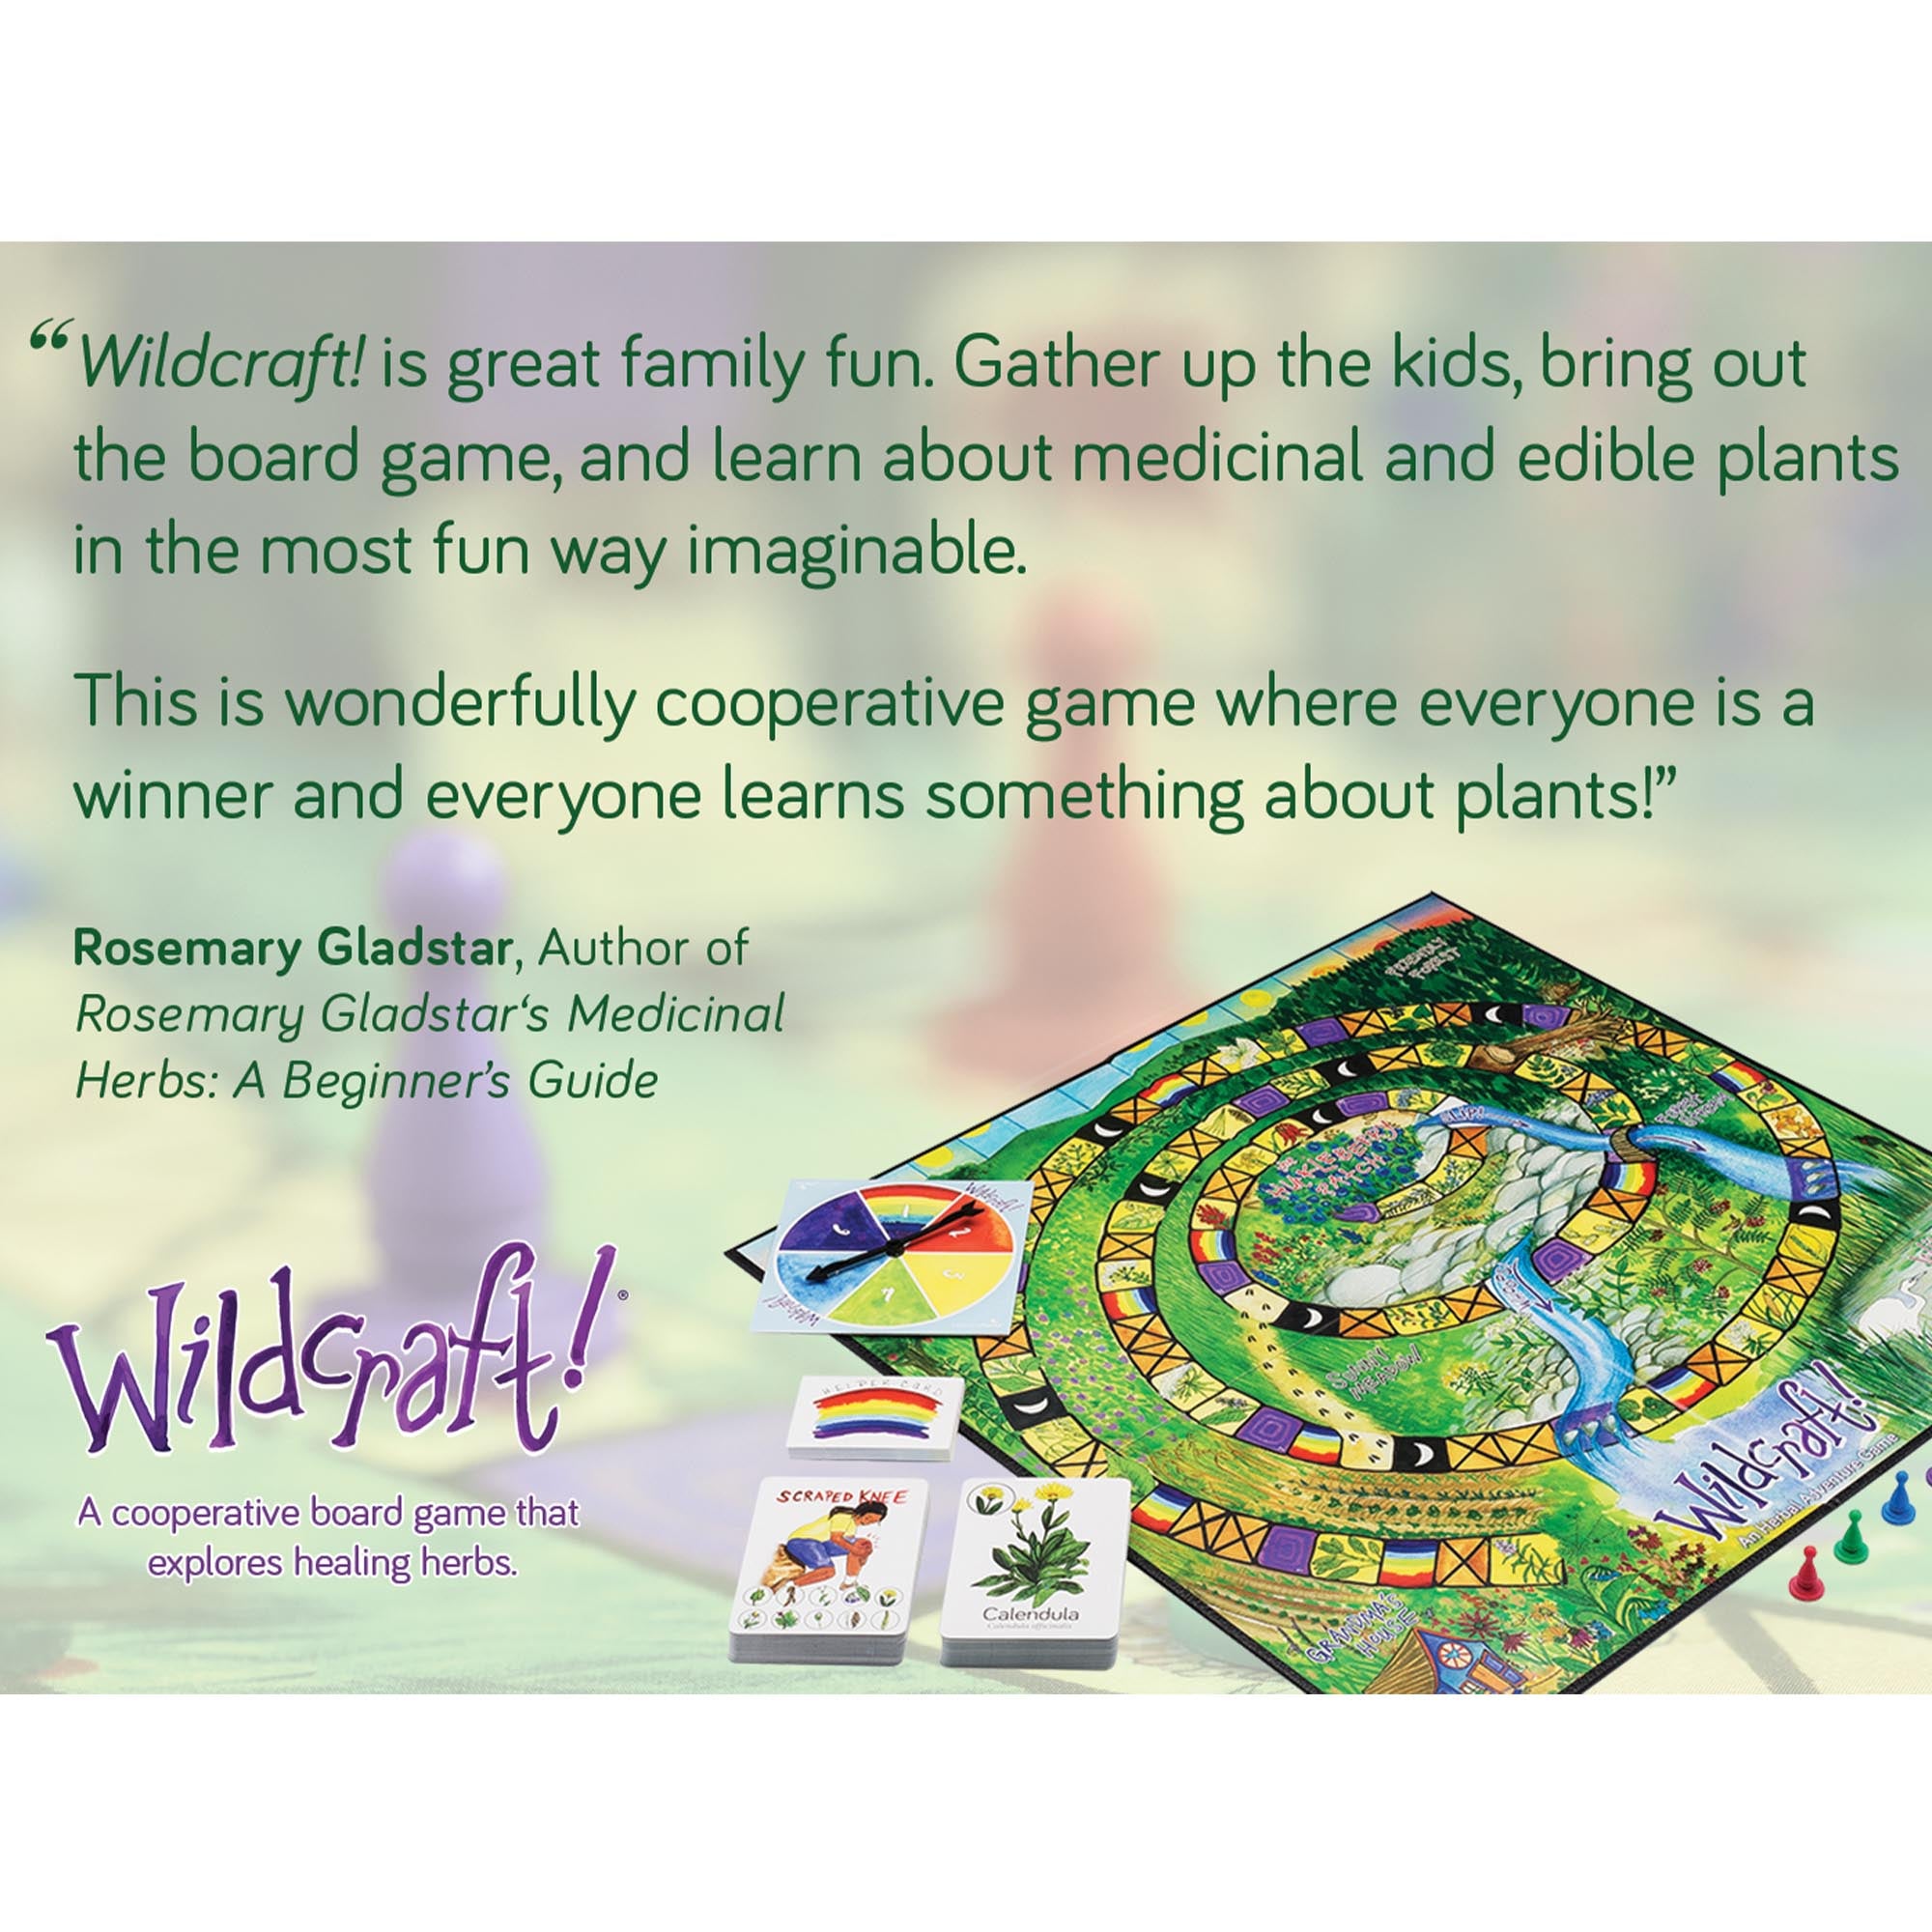 review of wildcraft game by rosemary gladstar, with game board visible next to text